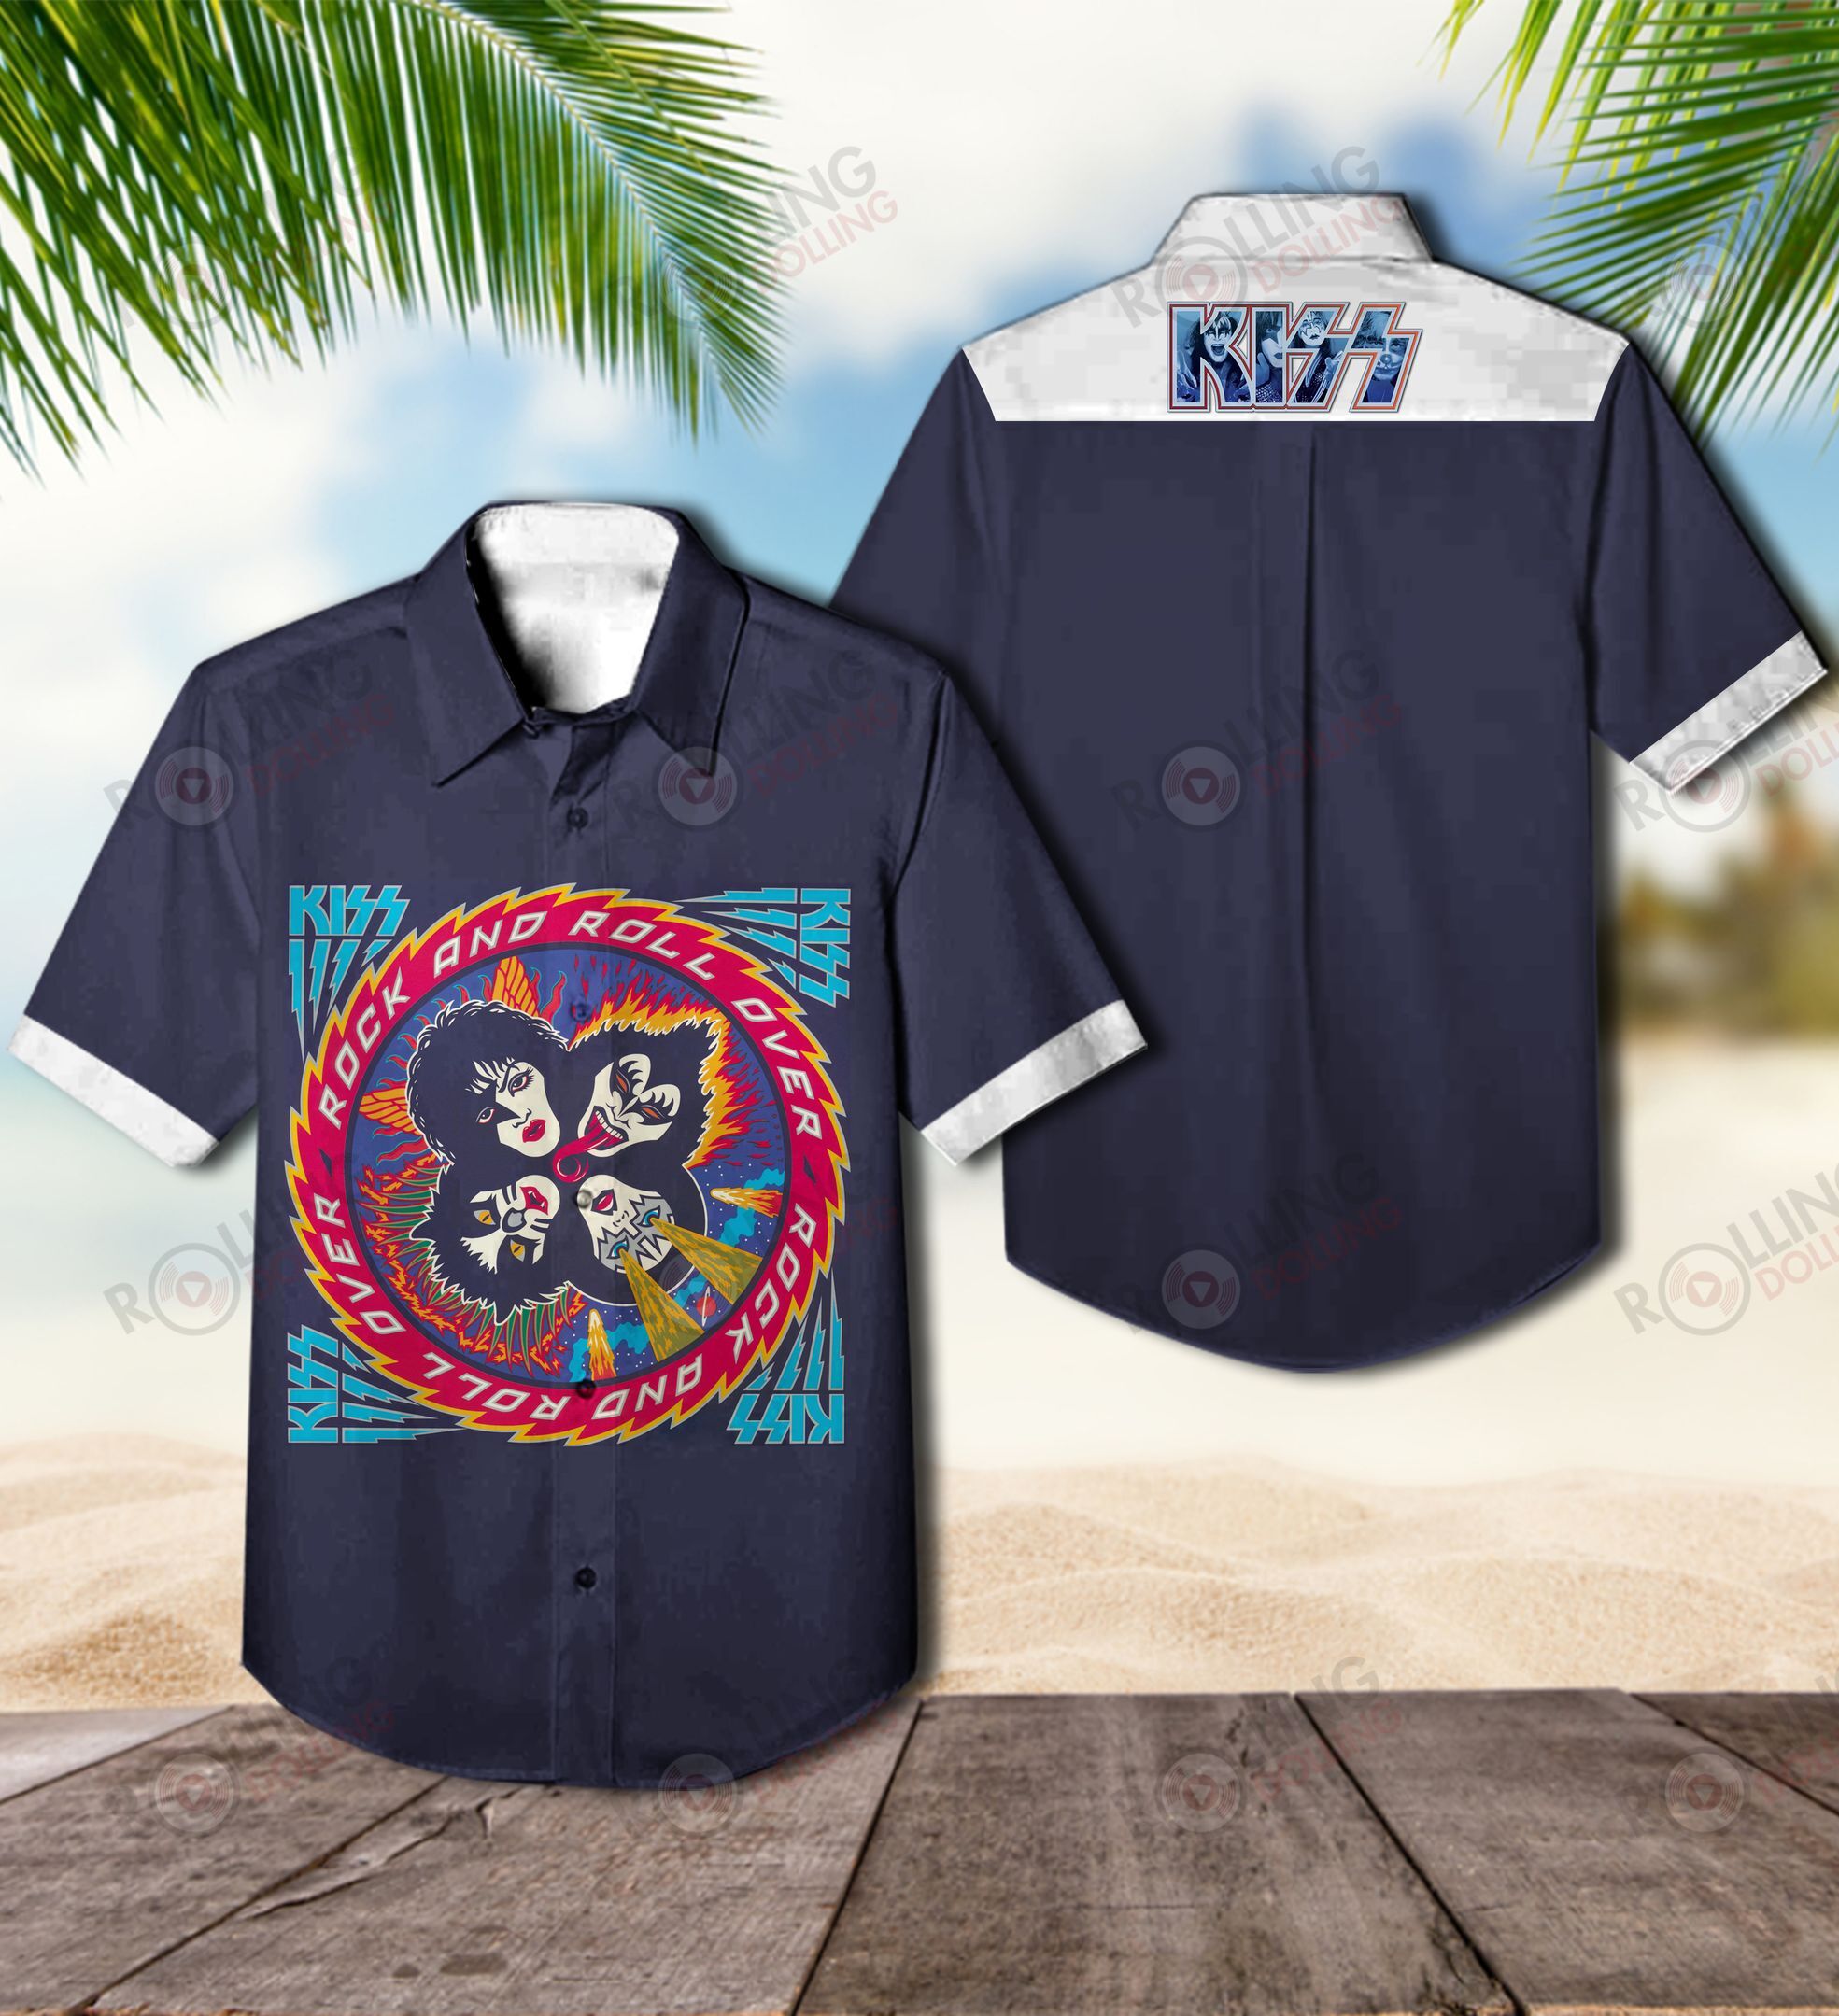 You'll have the perfect vacation outfit with this Hawaiian shirt 69